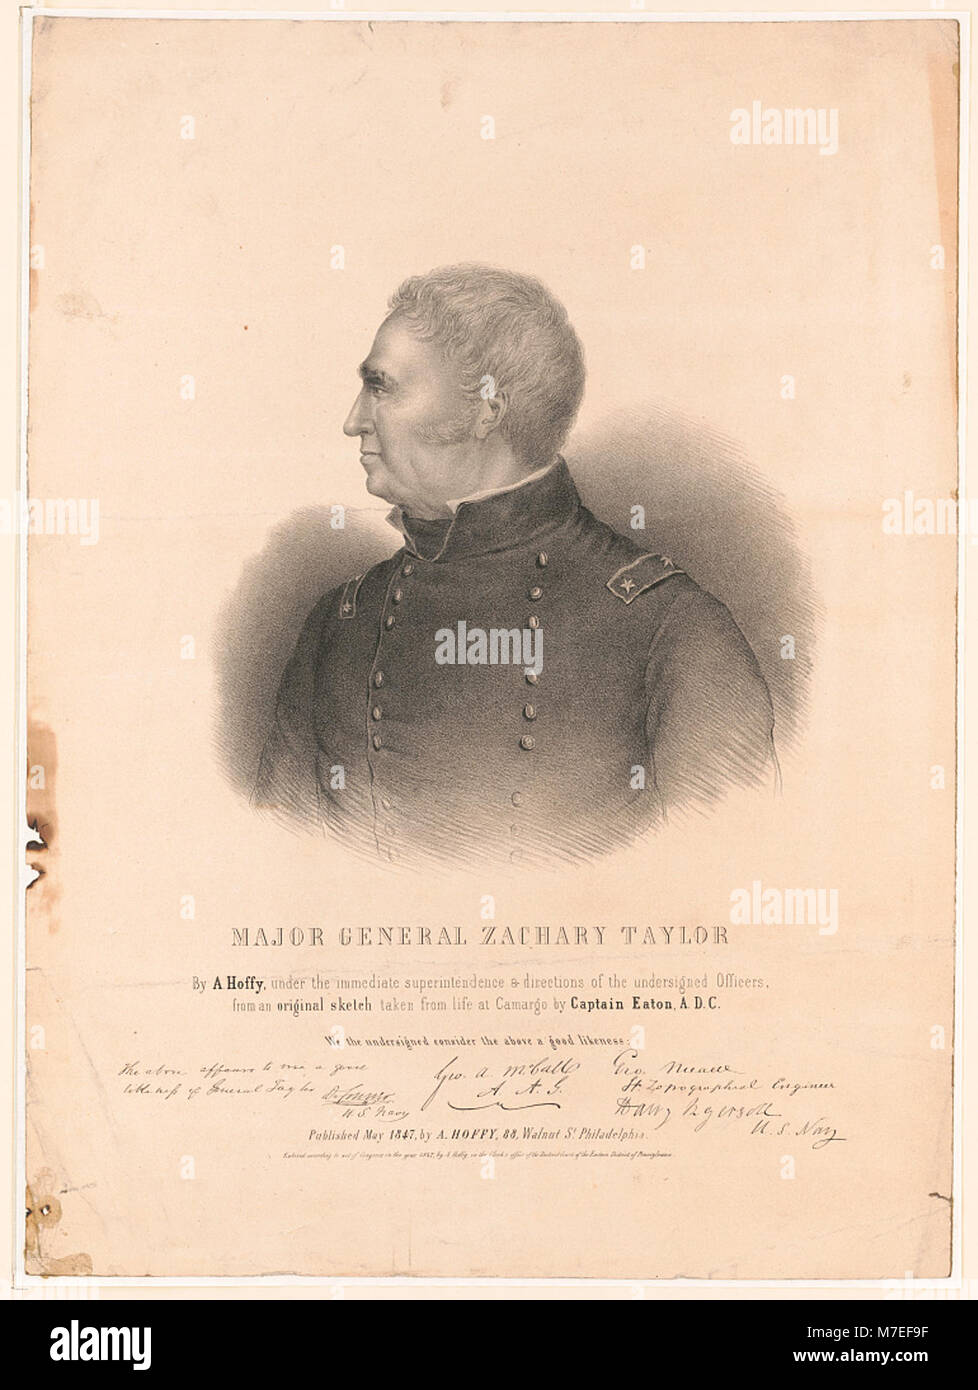 Major General Zachary Taylor - by A. Hoffy, under the immediate superintendence & directions of the undersigned officers, from an original sketch taken from life at Camargo by Captain Eaton, LCCN2004669620 Stock Photo